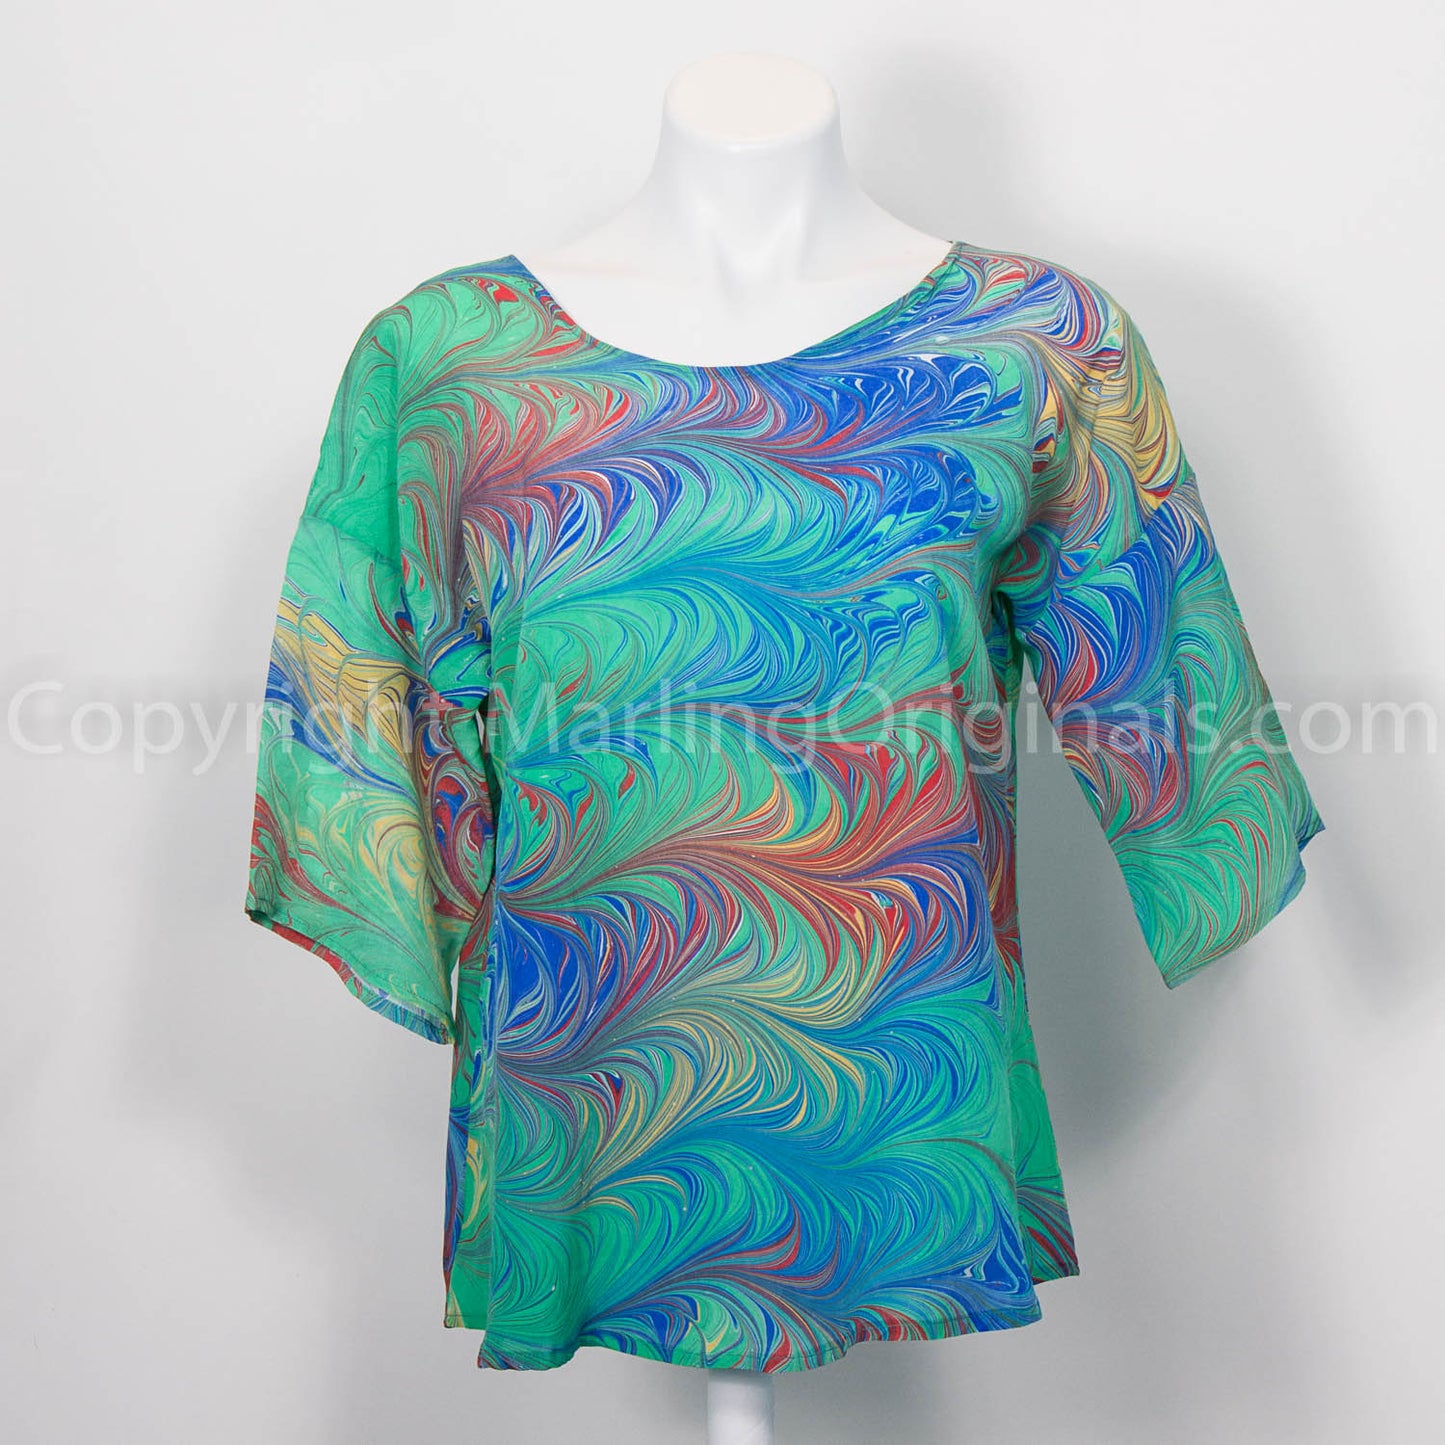 silk top marbled in apple green with accents of red, blue and yellow.  Round neck with half sleeve.